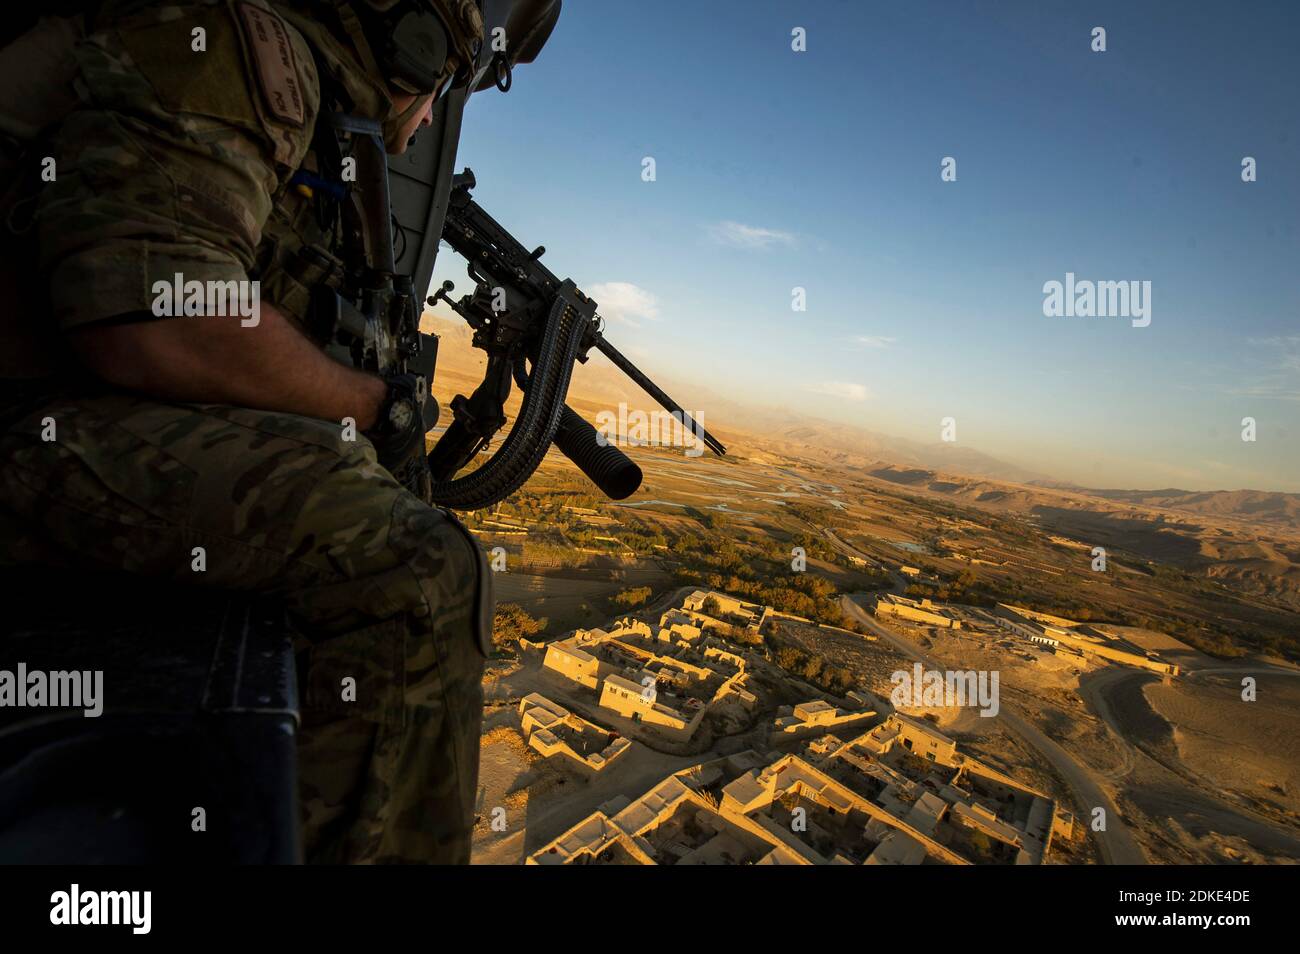 AFGHANISTAN - 23 March 2015 - US Air Force pararescueman, 83rd Expeditionary Rescue Squadron during a mission near Bagram Air Base in Afghanistan - Ph Stock Photo